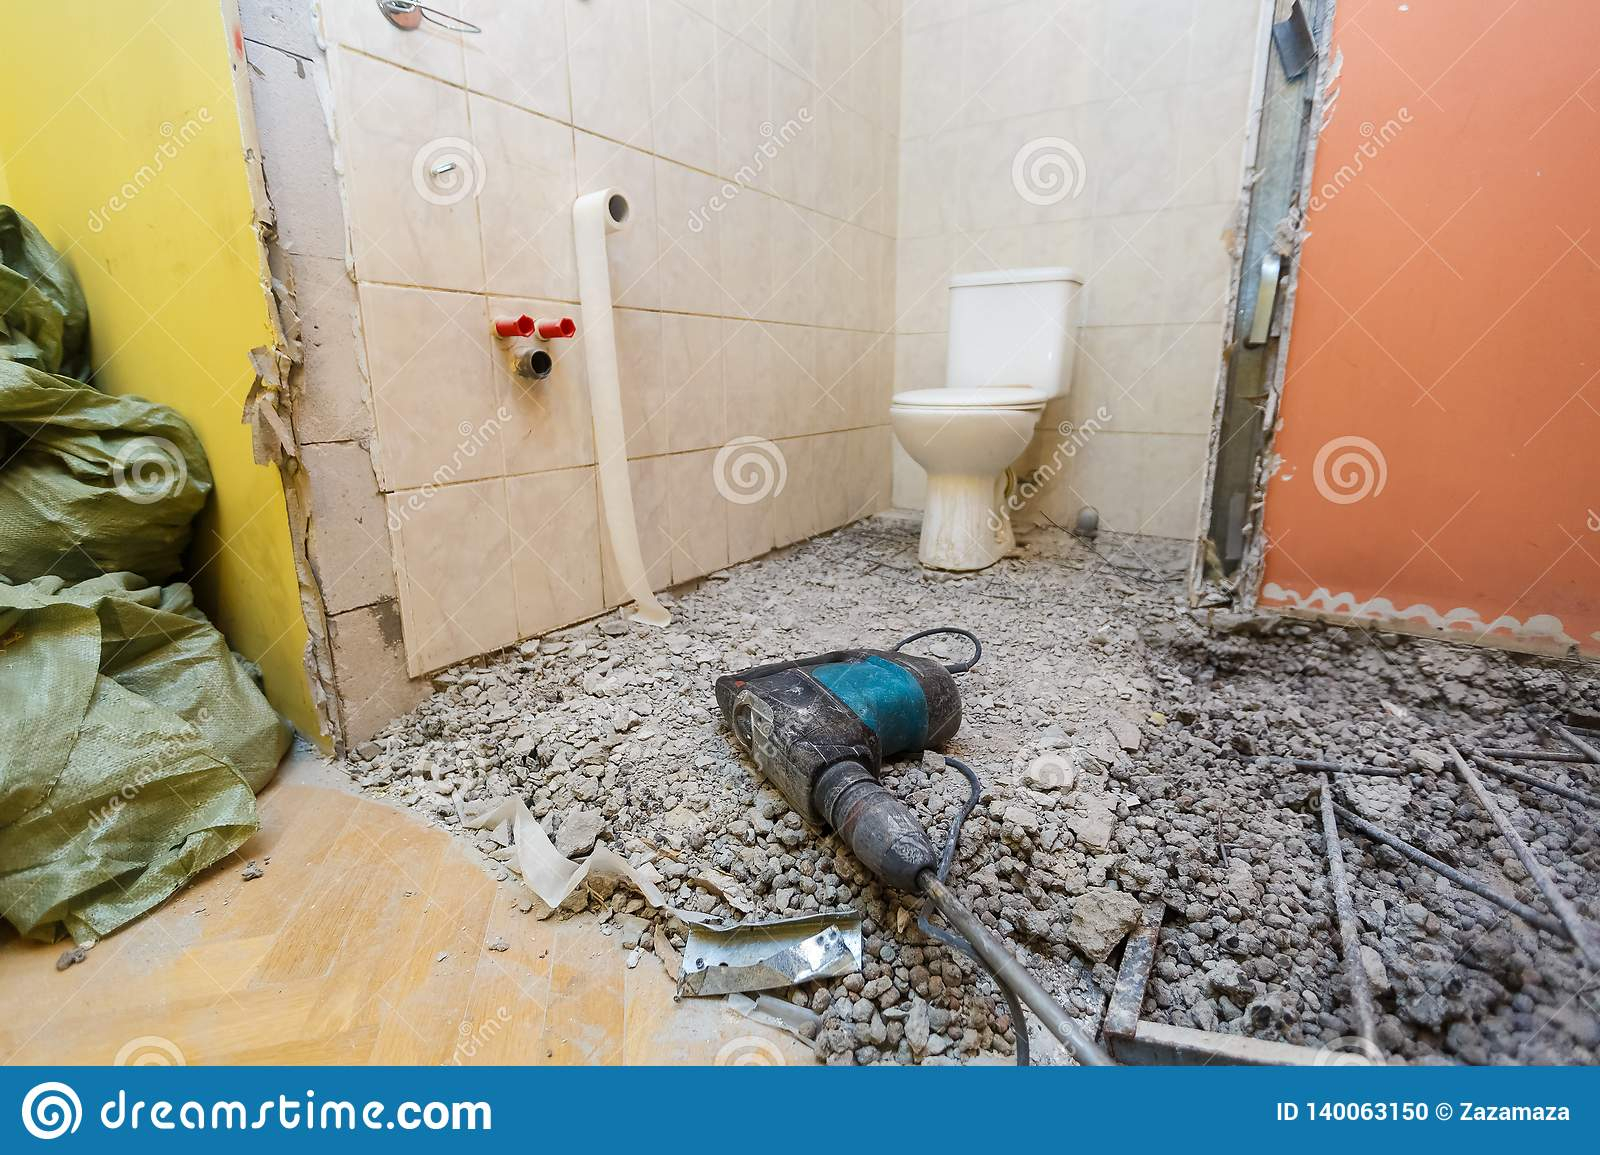 Toilet Room Or Restroom With Old Toilet Bowl And pertaining to size 1600 X 1155